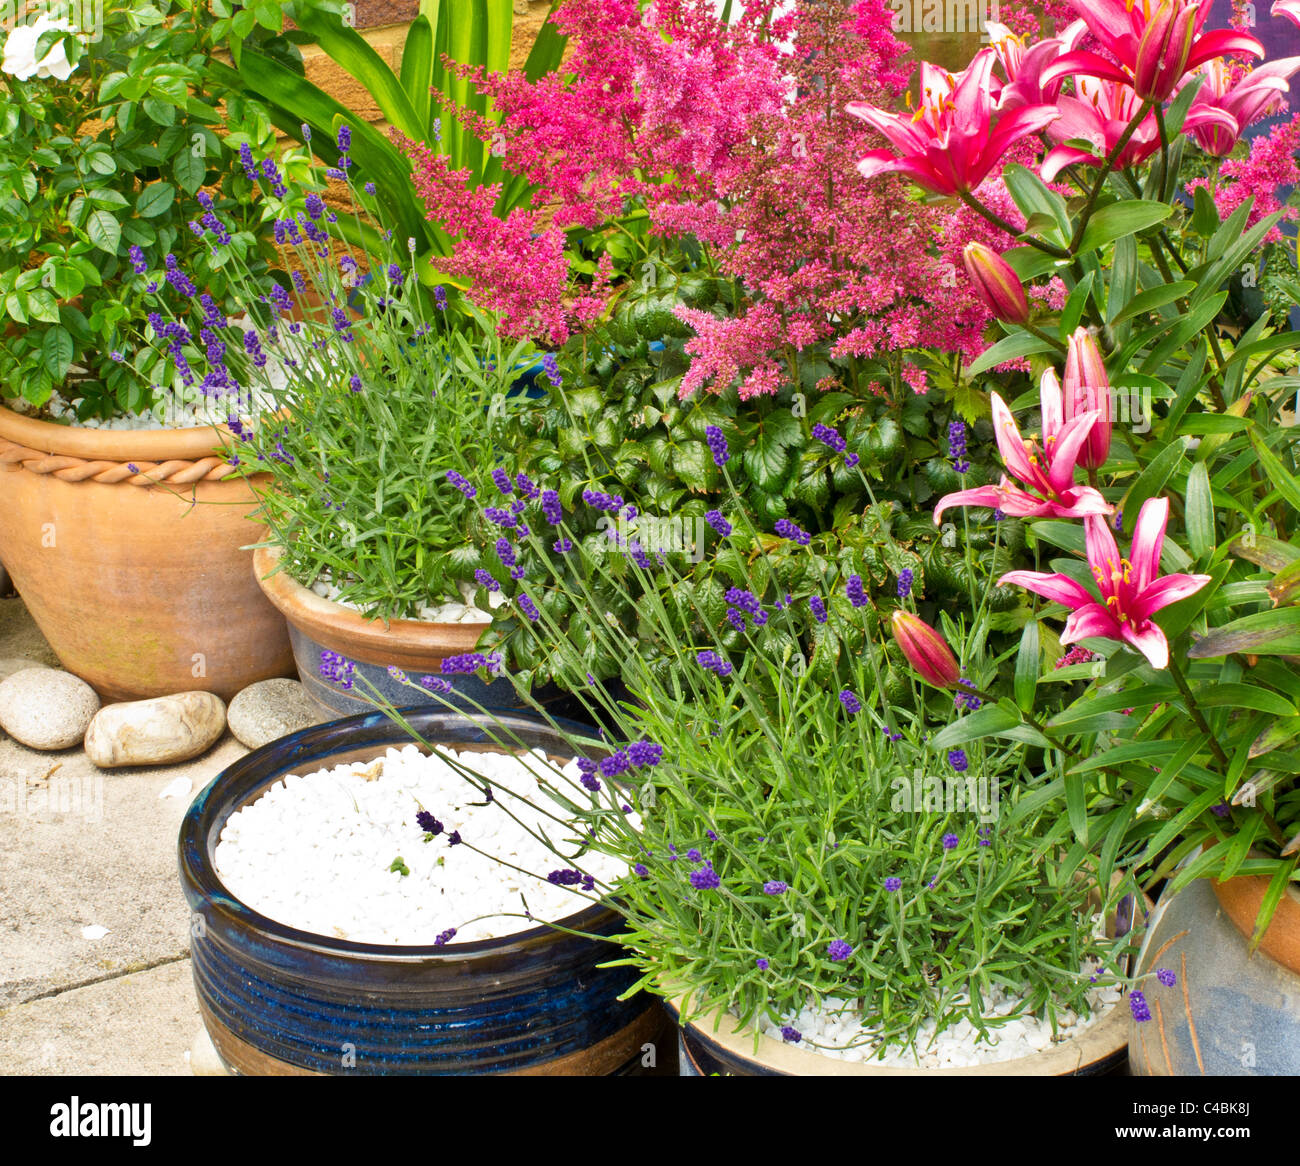 Pots and containers in the corner of a patio with roses, lavender, lilies and astilbe Stock Photo